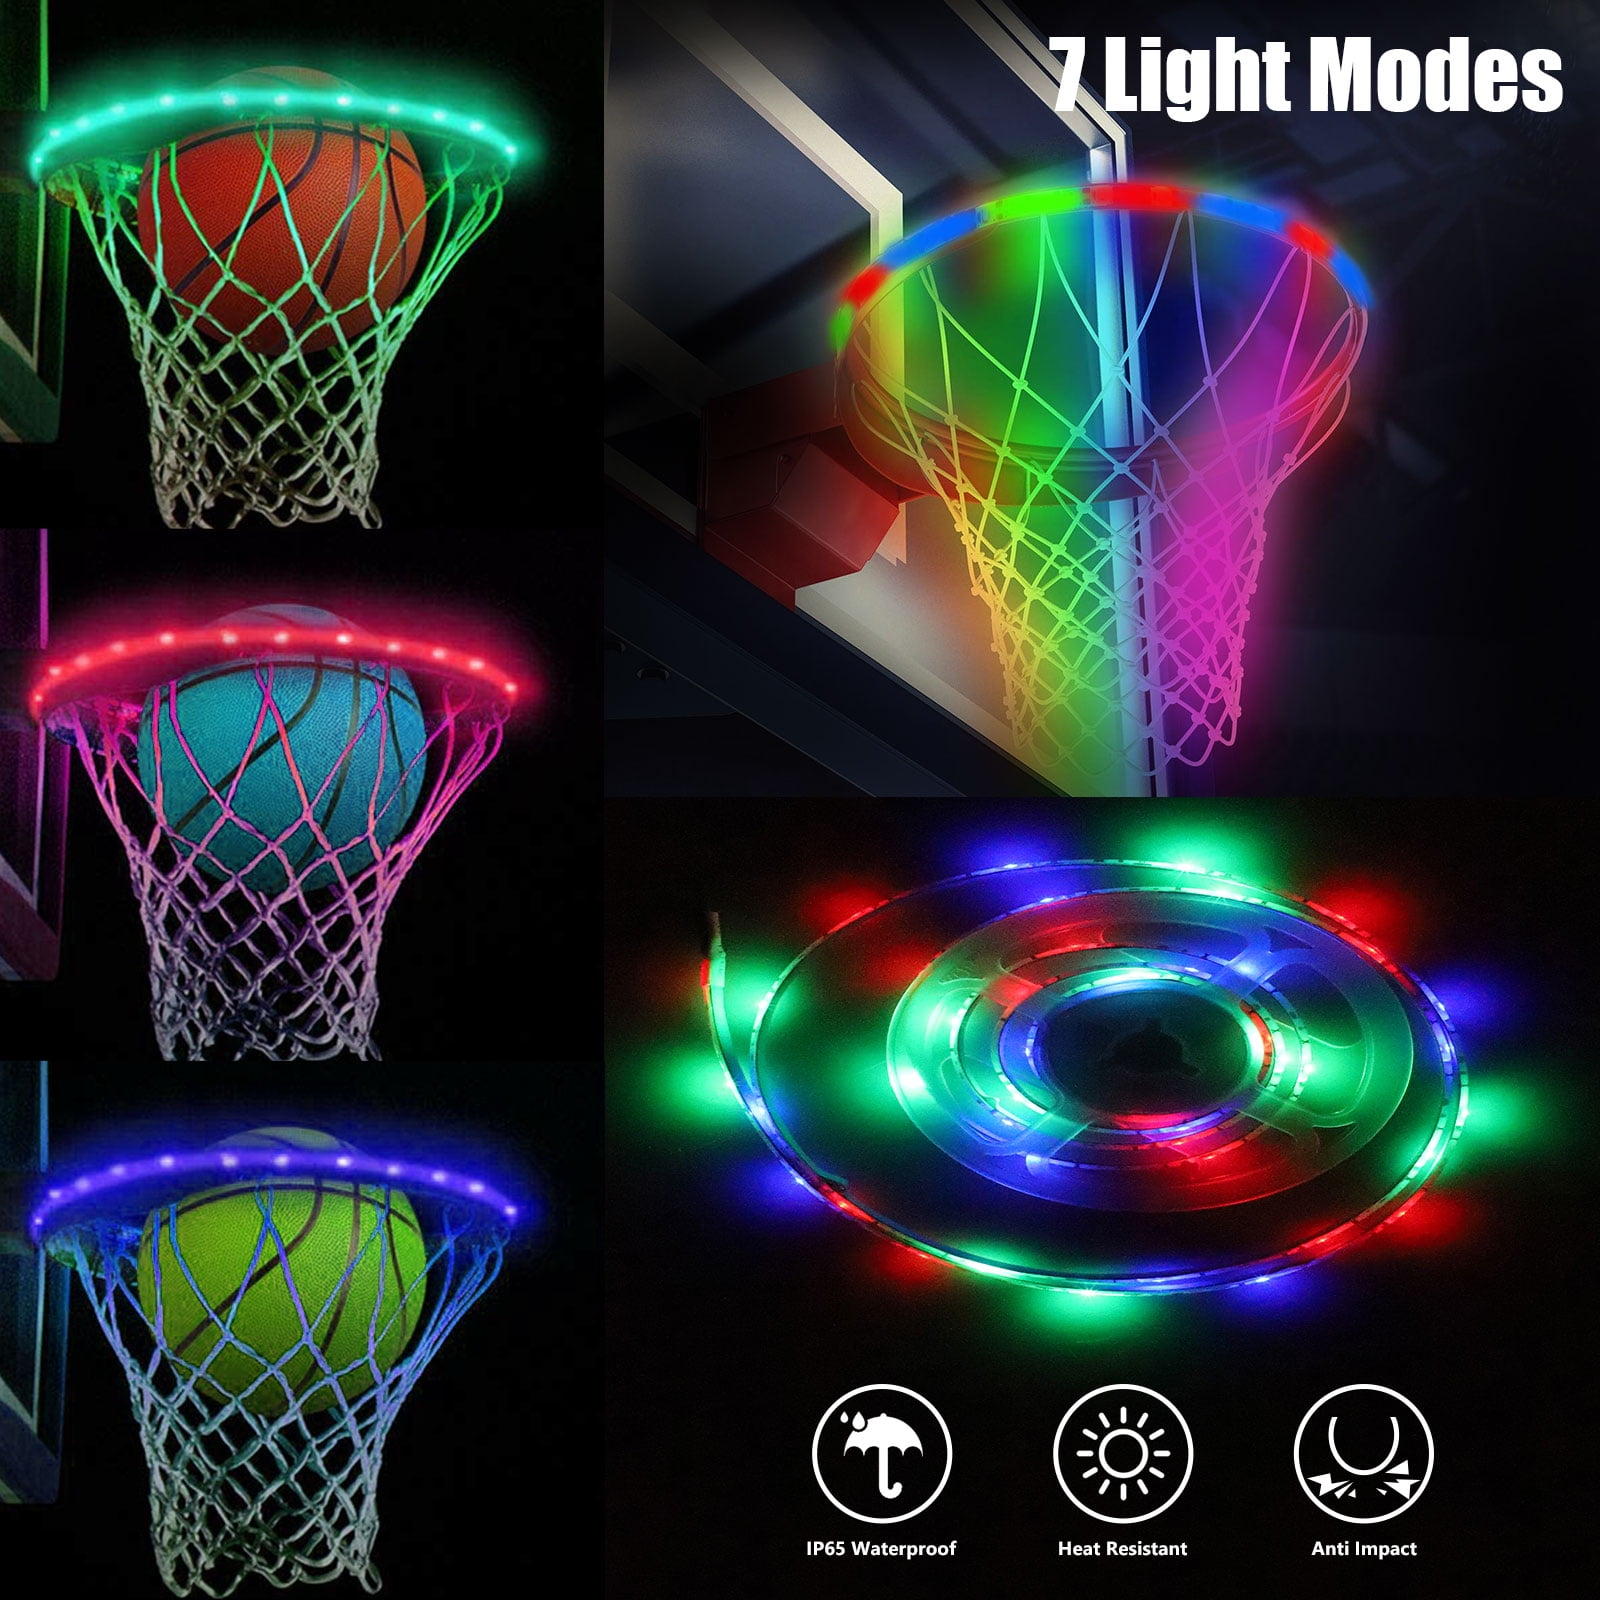 Cawbing LED Basketball Hoop Lights Basketball Rim LED Solar Light for Kids Adults Parties and Training,Color Shot Sensing Action for Playing at Night Outdoors